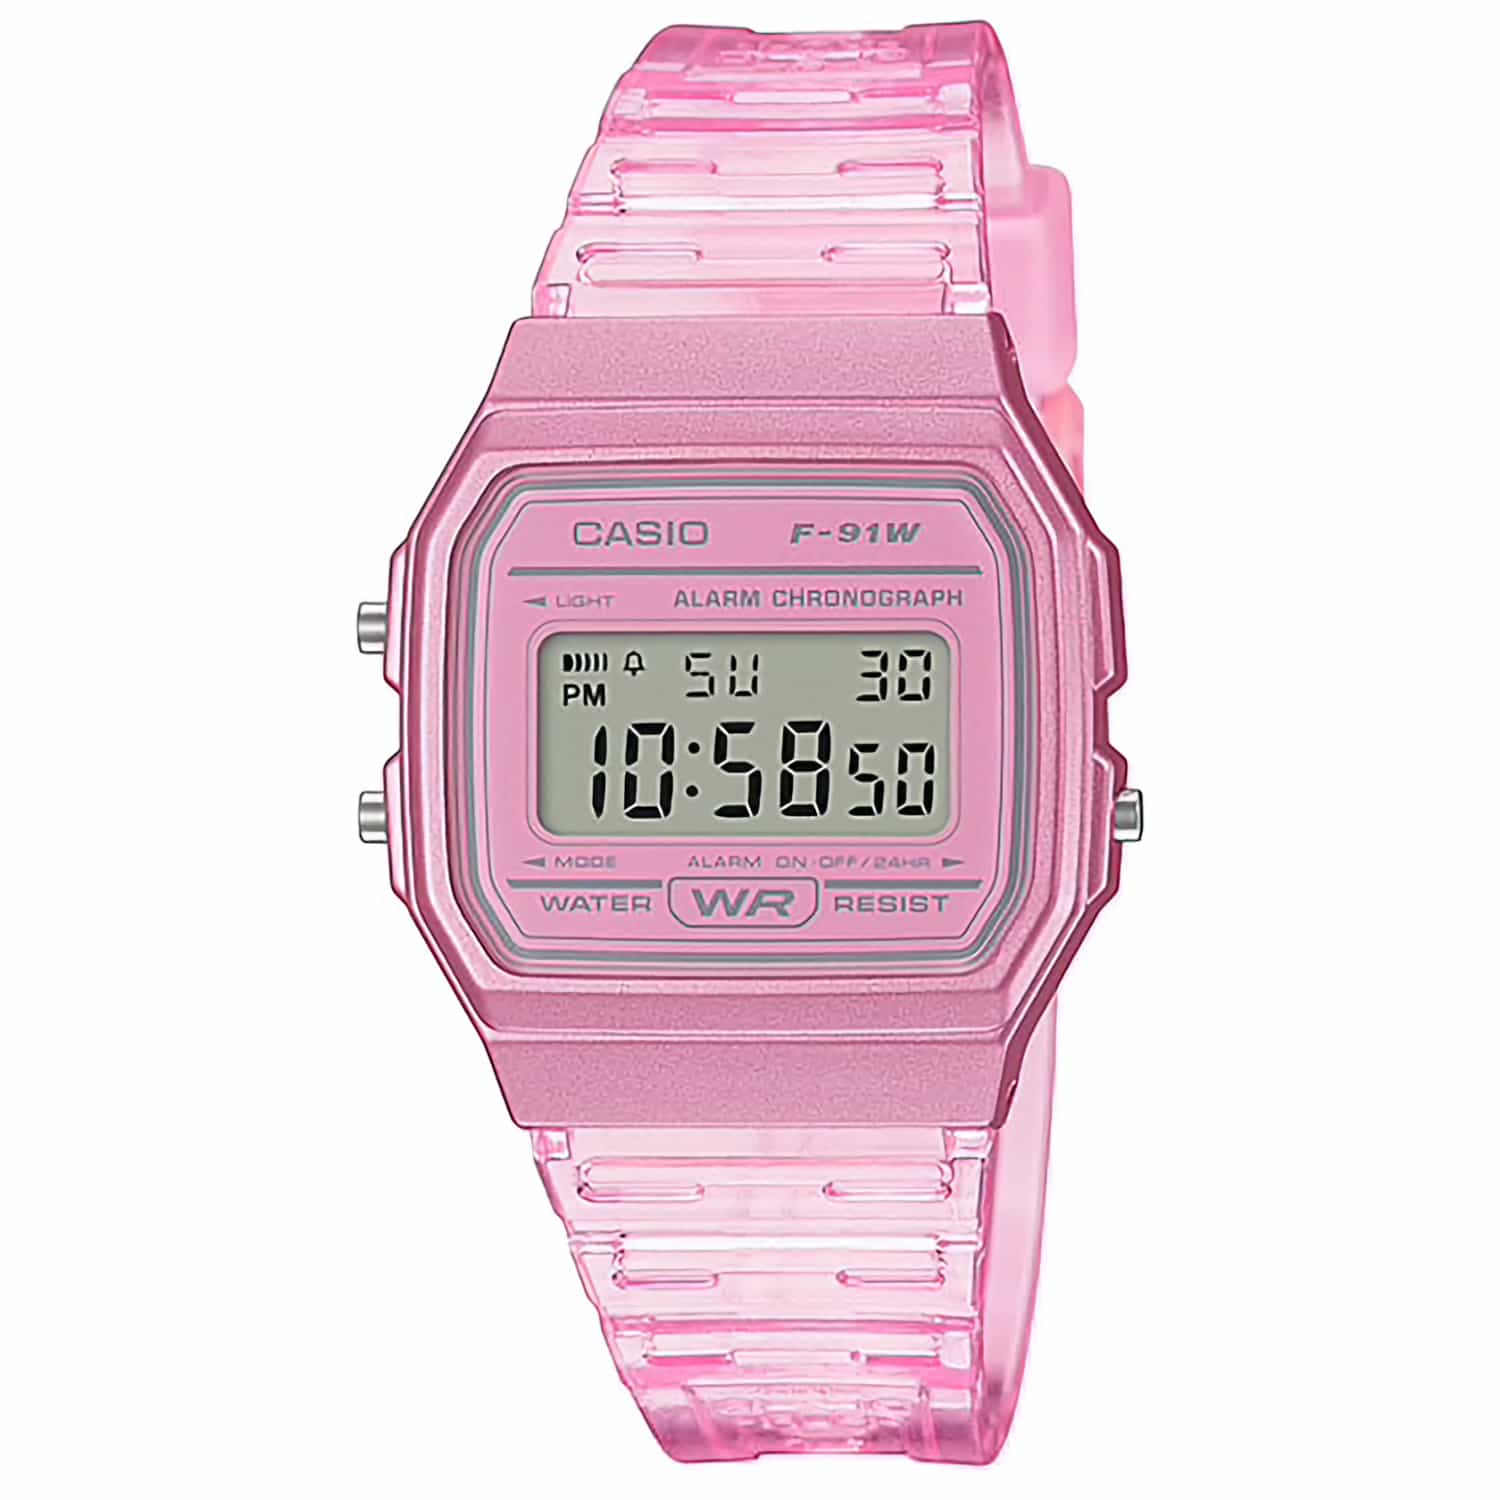 F91WS-4 Casio Digital Watch. A long time favourite Casio Digital Watch Afterpay - Split your purchase into 4 instalments - Pay for your purchase over 4 instalments, due every two weeks. You’ll pay your first installment at the time of pur where to buy mic